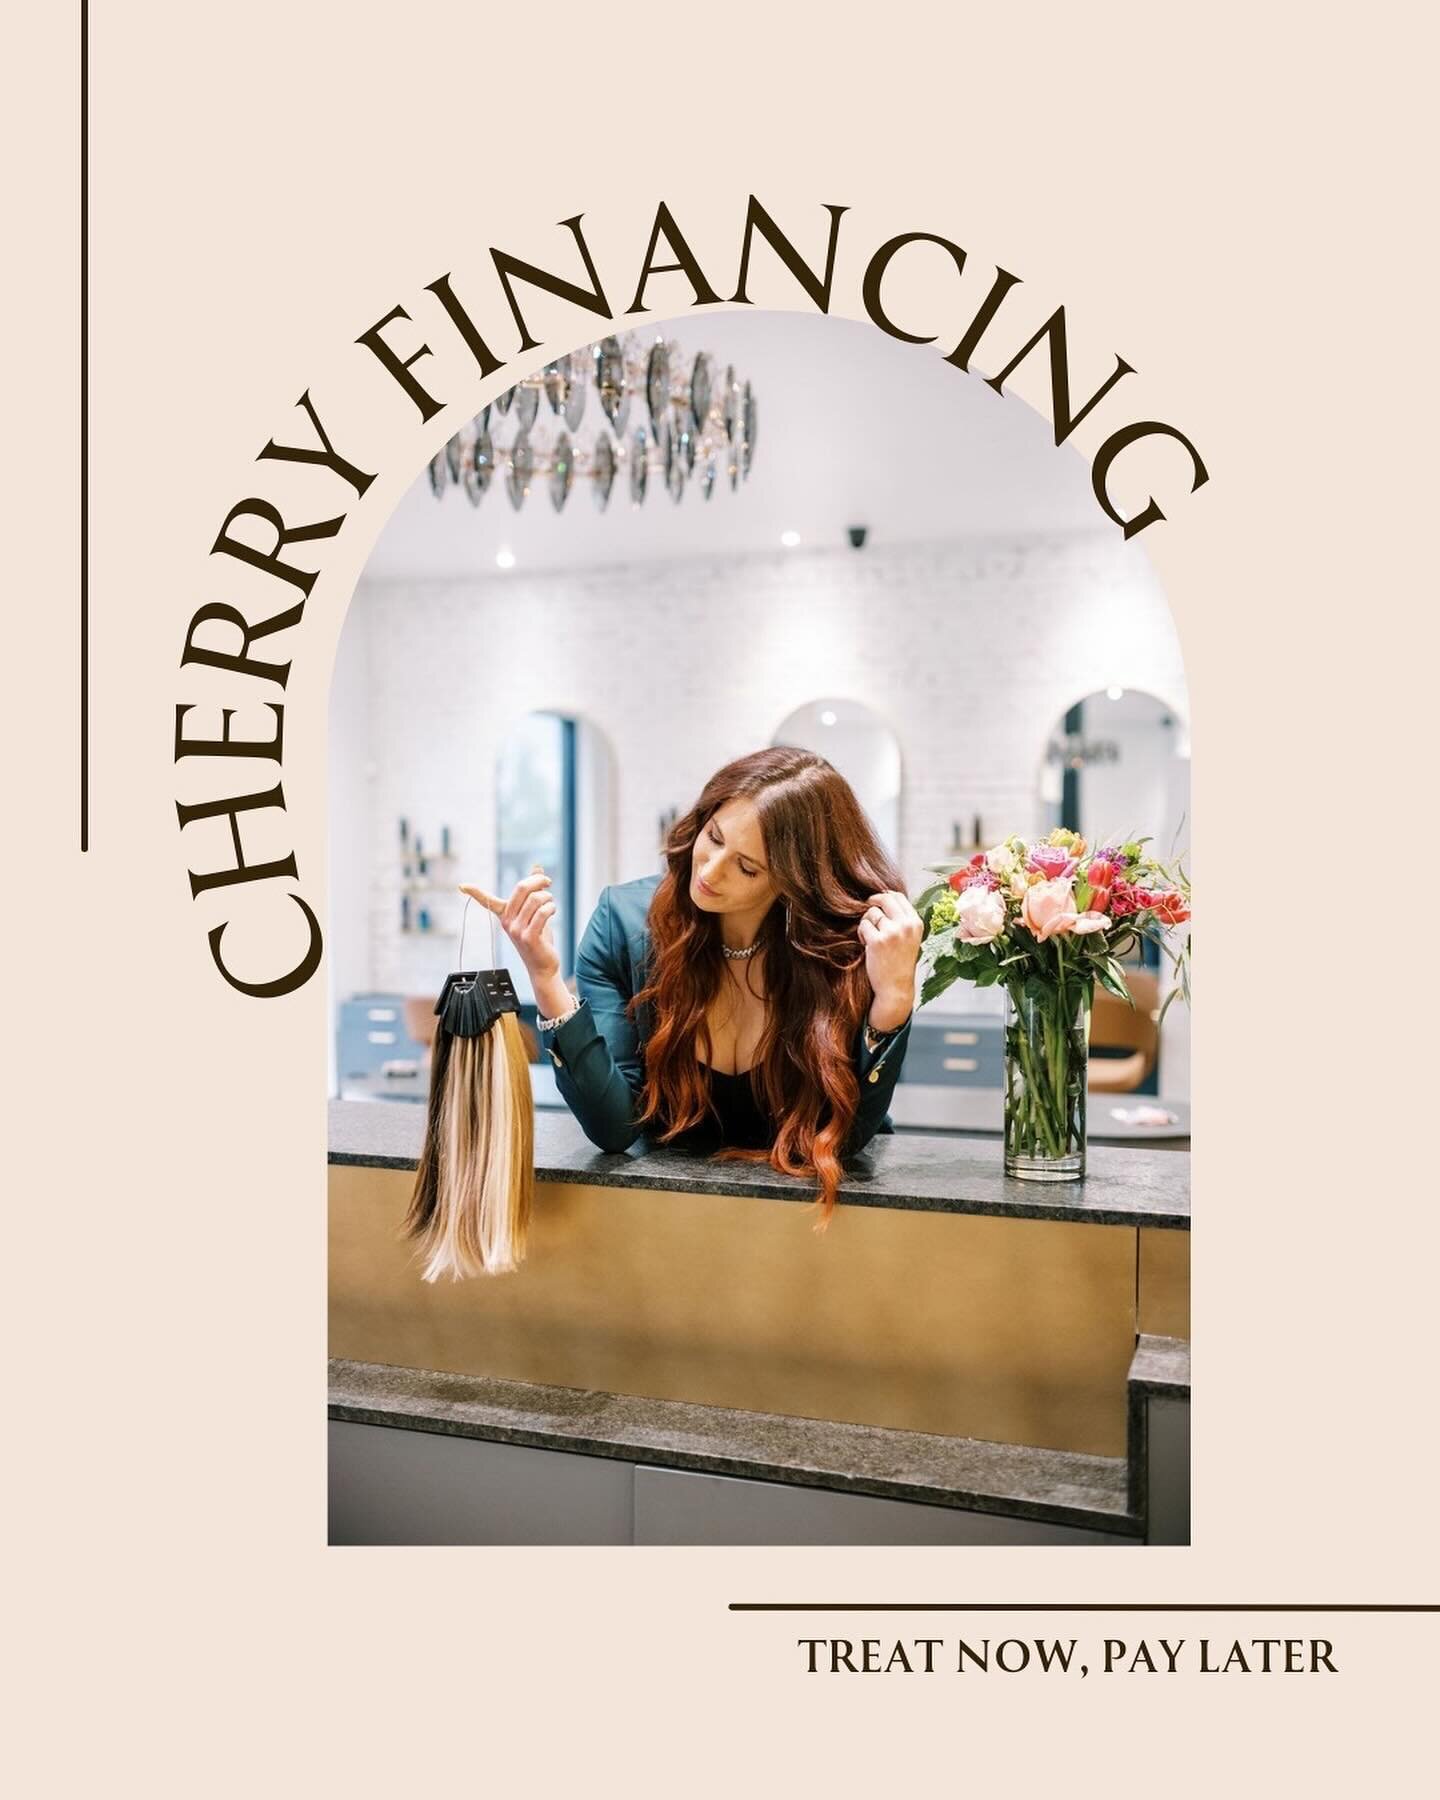 Crown + Cherry Financing! 
Get the hair of your dreams today and pay over 3 months. 
⠀⠀⠀⠀⠀⠀⠀⠀⠀
🍒NO FEES + 0% financing for 3 months.
🍒No hard credit checks
🍒Apply in seconds
⠀⠀⠀⠀⠀⠀⠀⠀⠀
Click the link in our bio to learn more